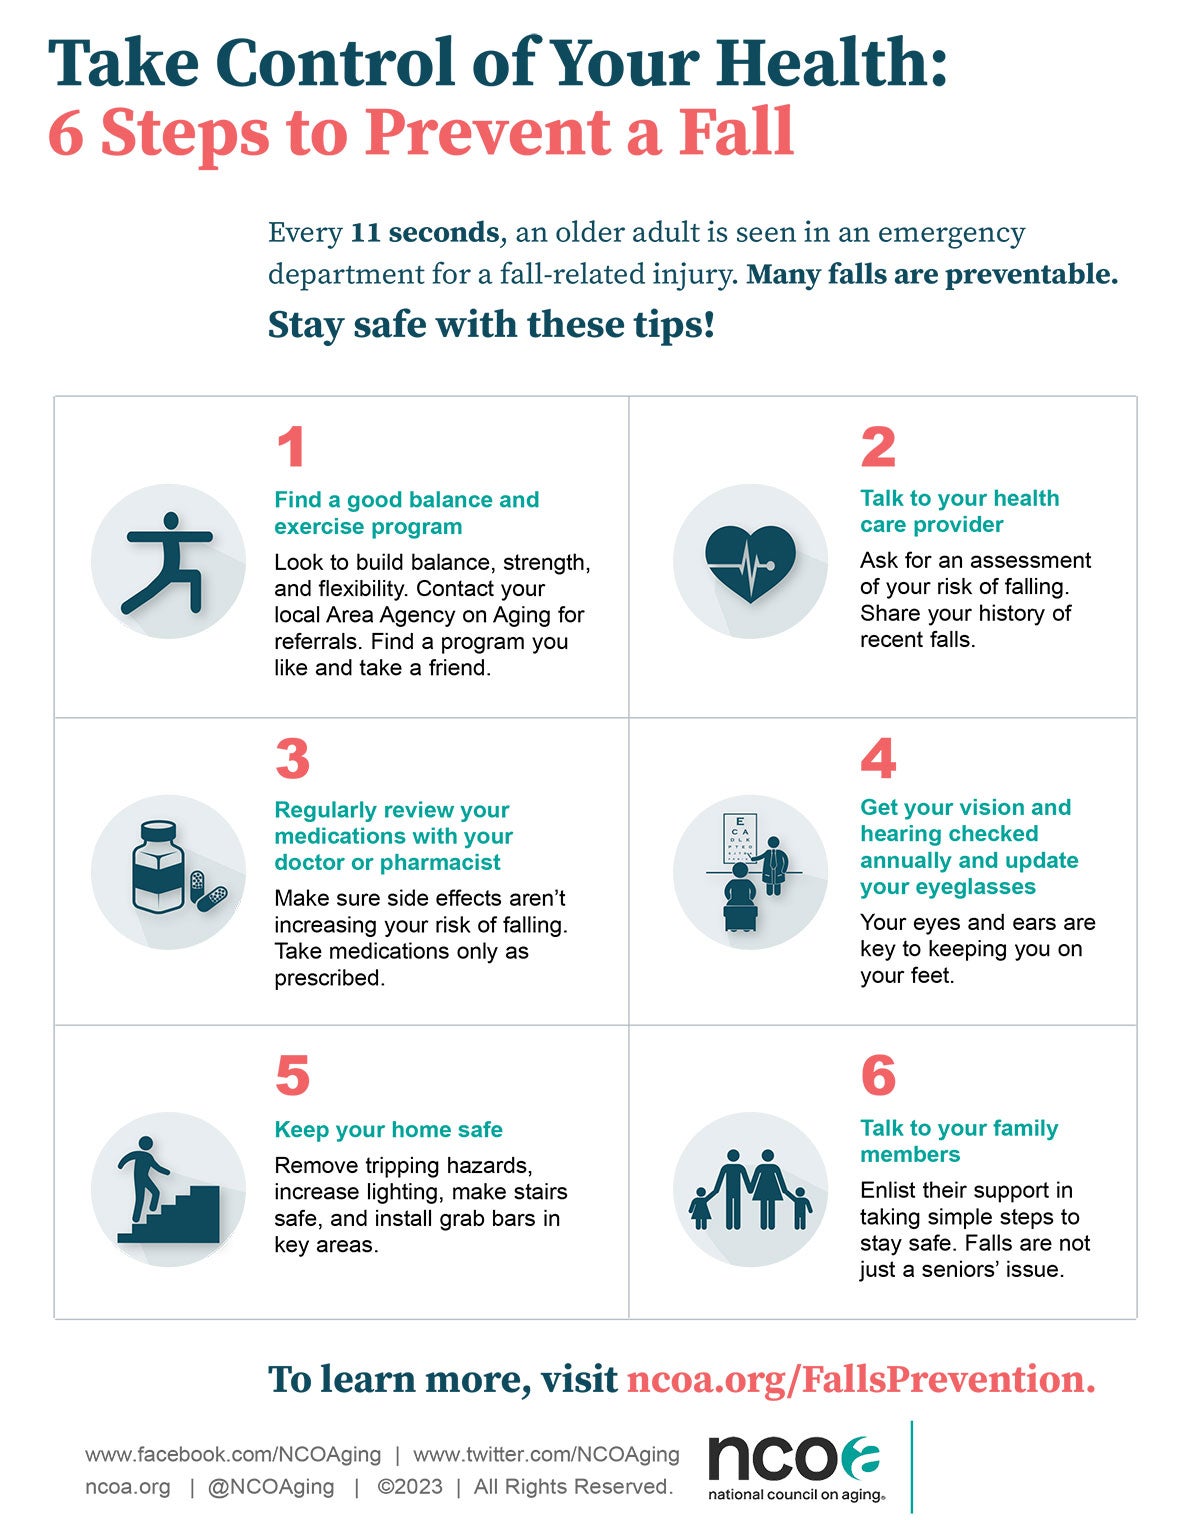 6 Steps to Prevent a Fall